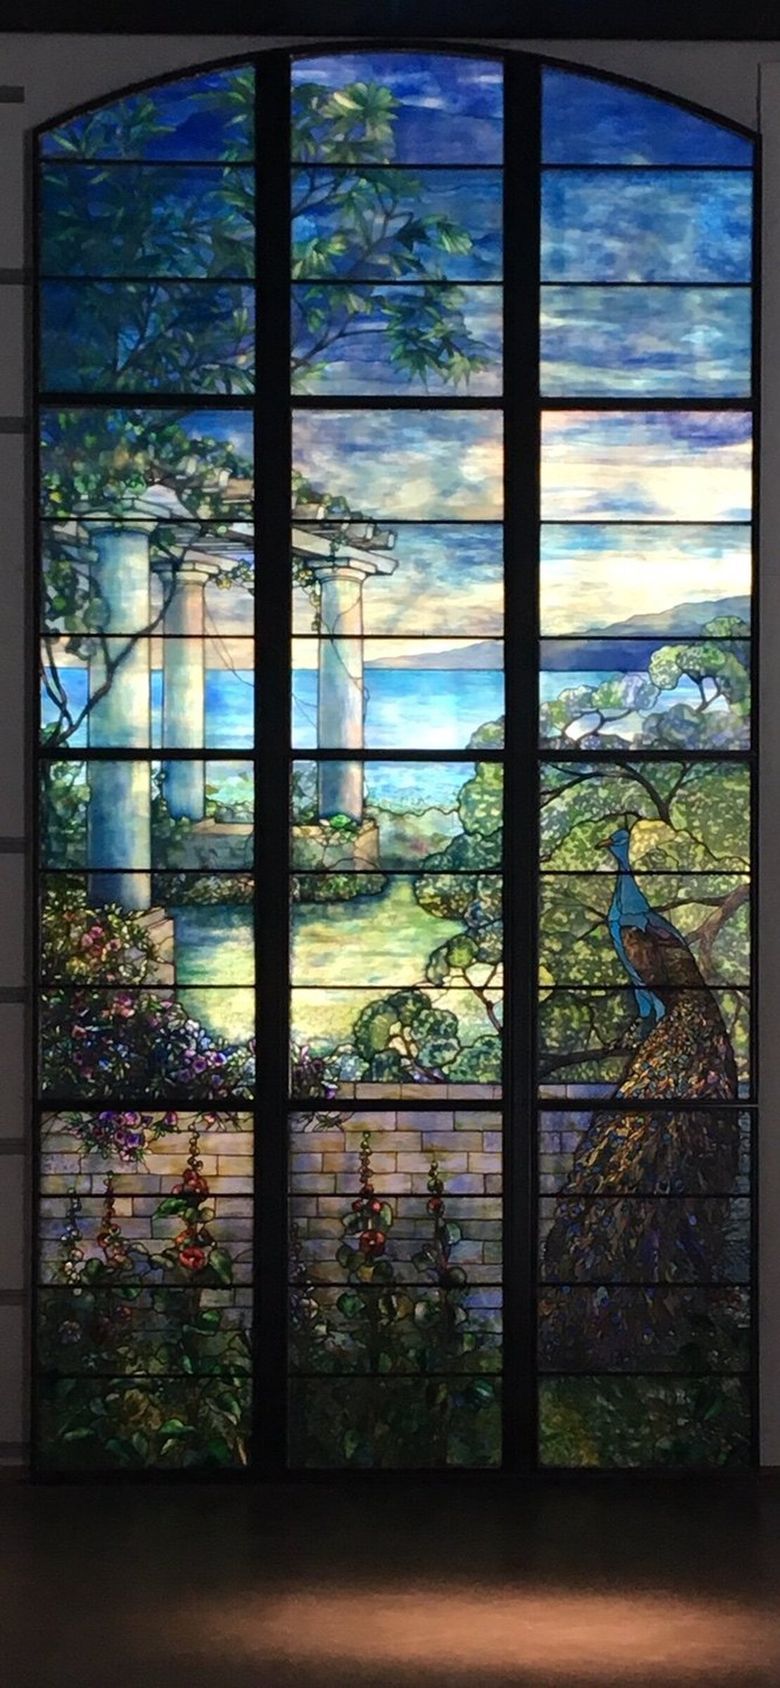 THE JOHN AND ELIZA LEARY MANSION: Into the great hall&#8217;s essentially Renaissance Revival setting, the architect incorporated a monumental nine-light stained-glass window of a peacock in a garden by Louis Comfort Tiffany. (Lawrence Kreisman)